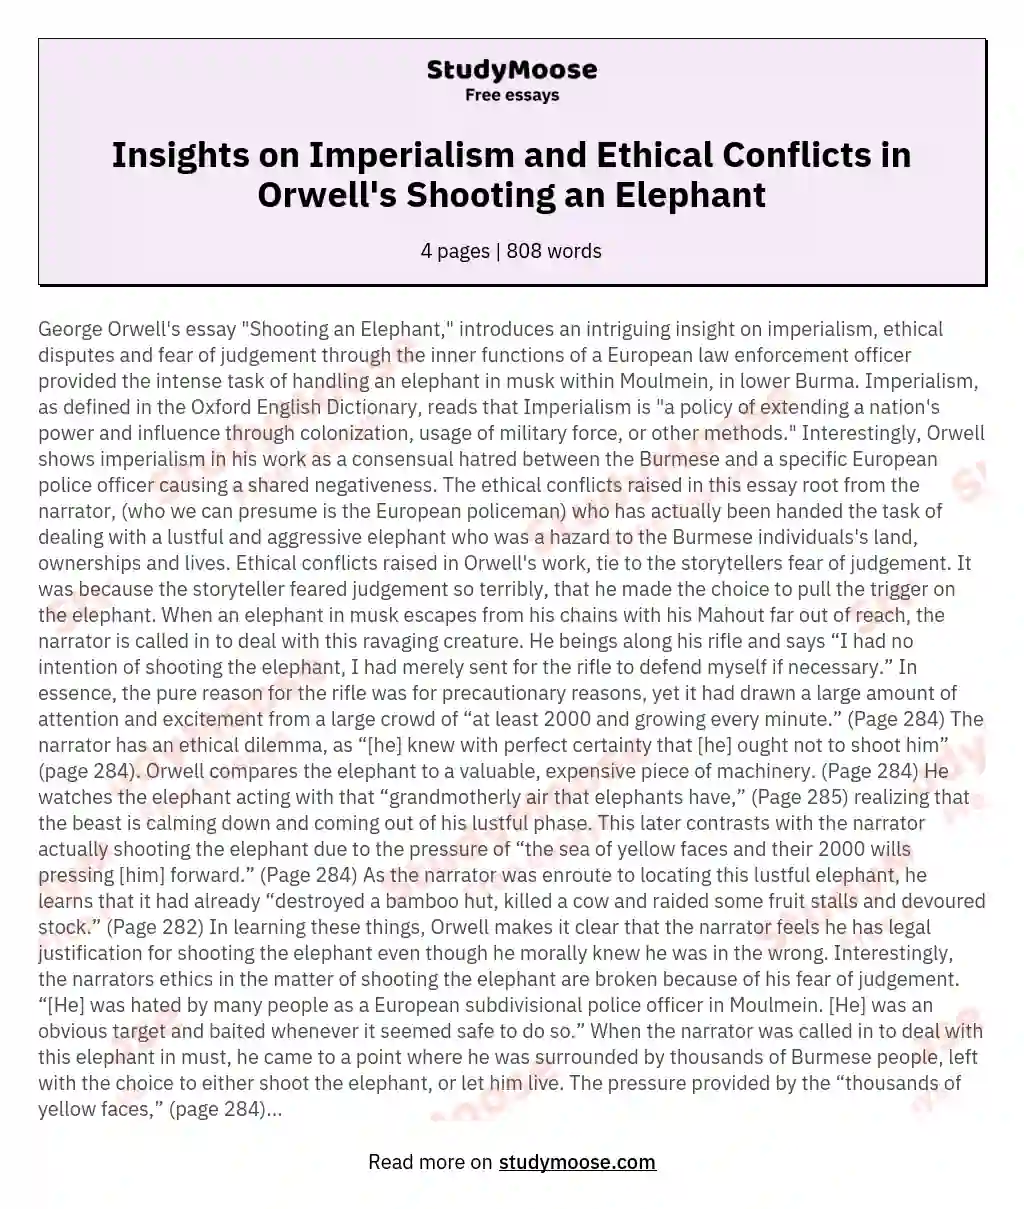 Insights on Imperialism and Ethical Conflicts in Orwell's Shooting an Elephant essay